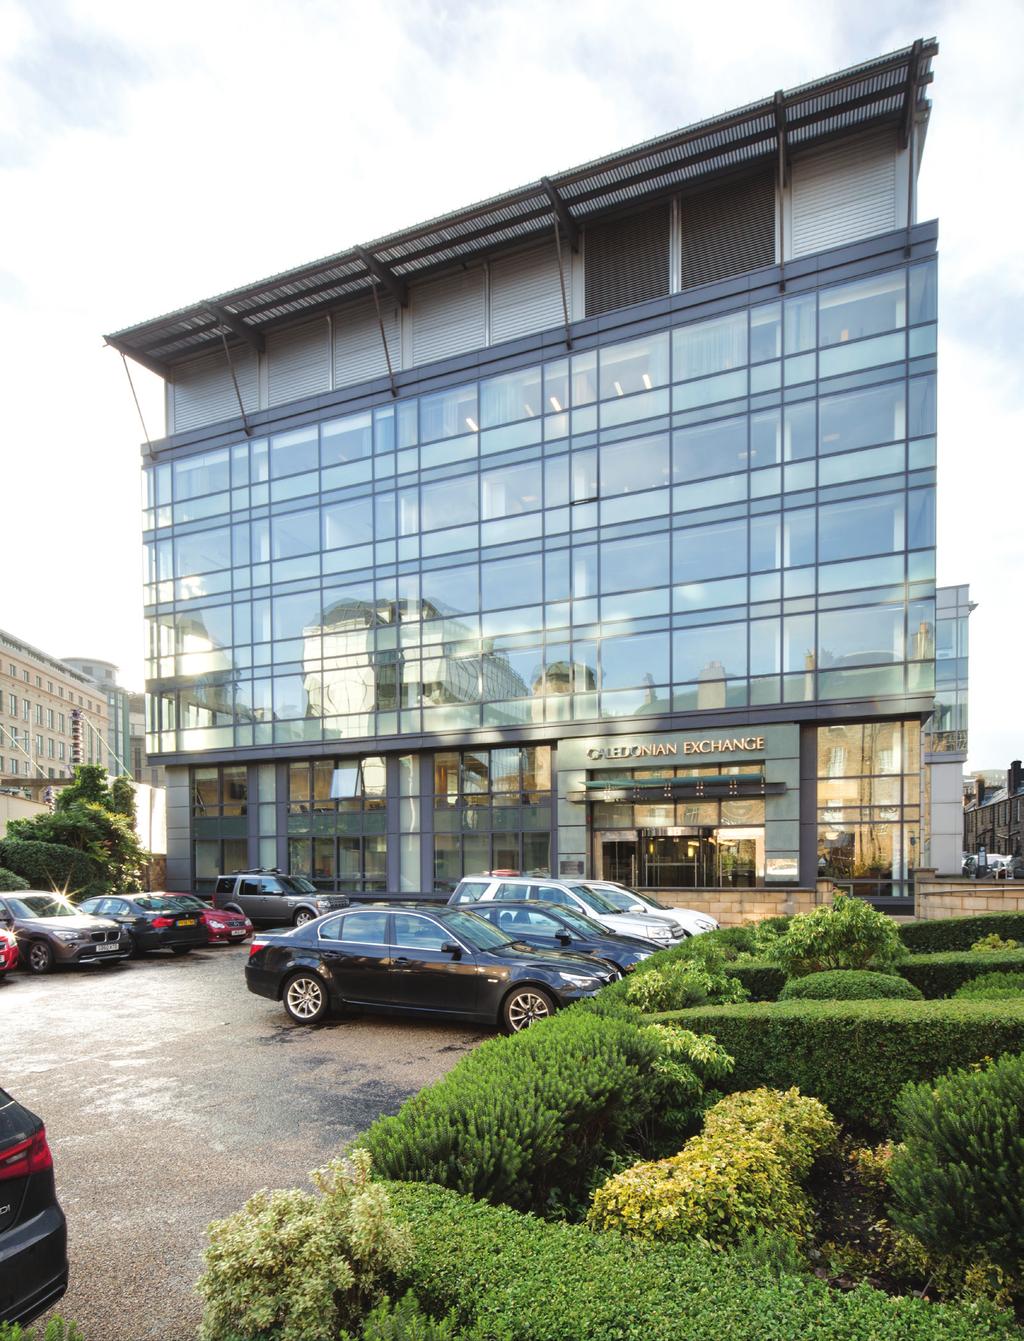 CANNING STREET EH EG Refurbished Offices To Let,0-0, Sq Ft (00 -,00 Sq M) www.